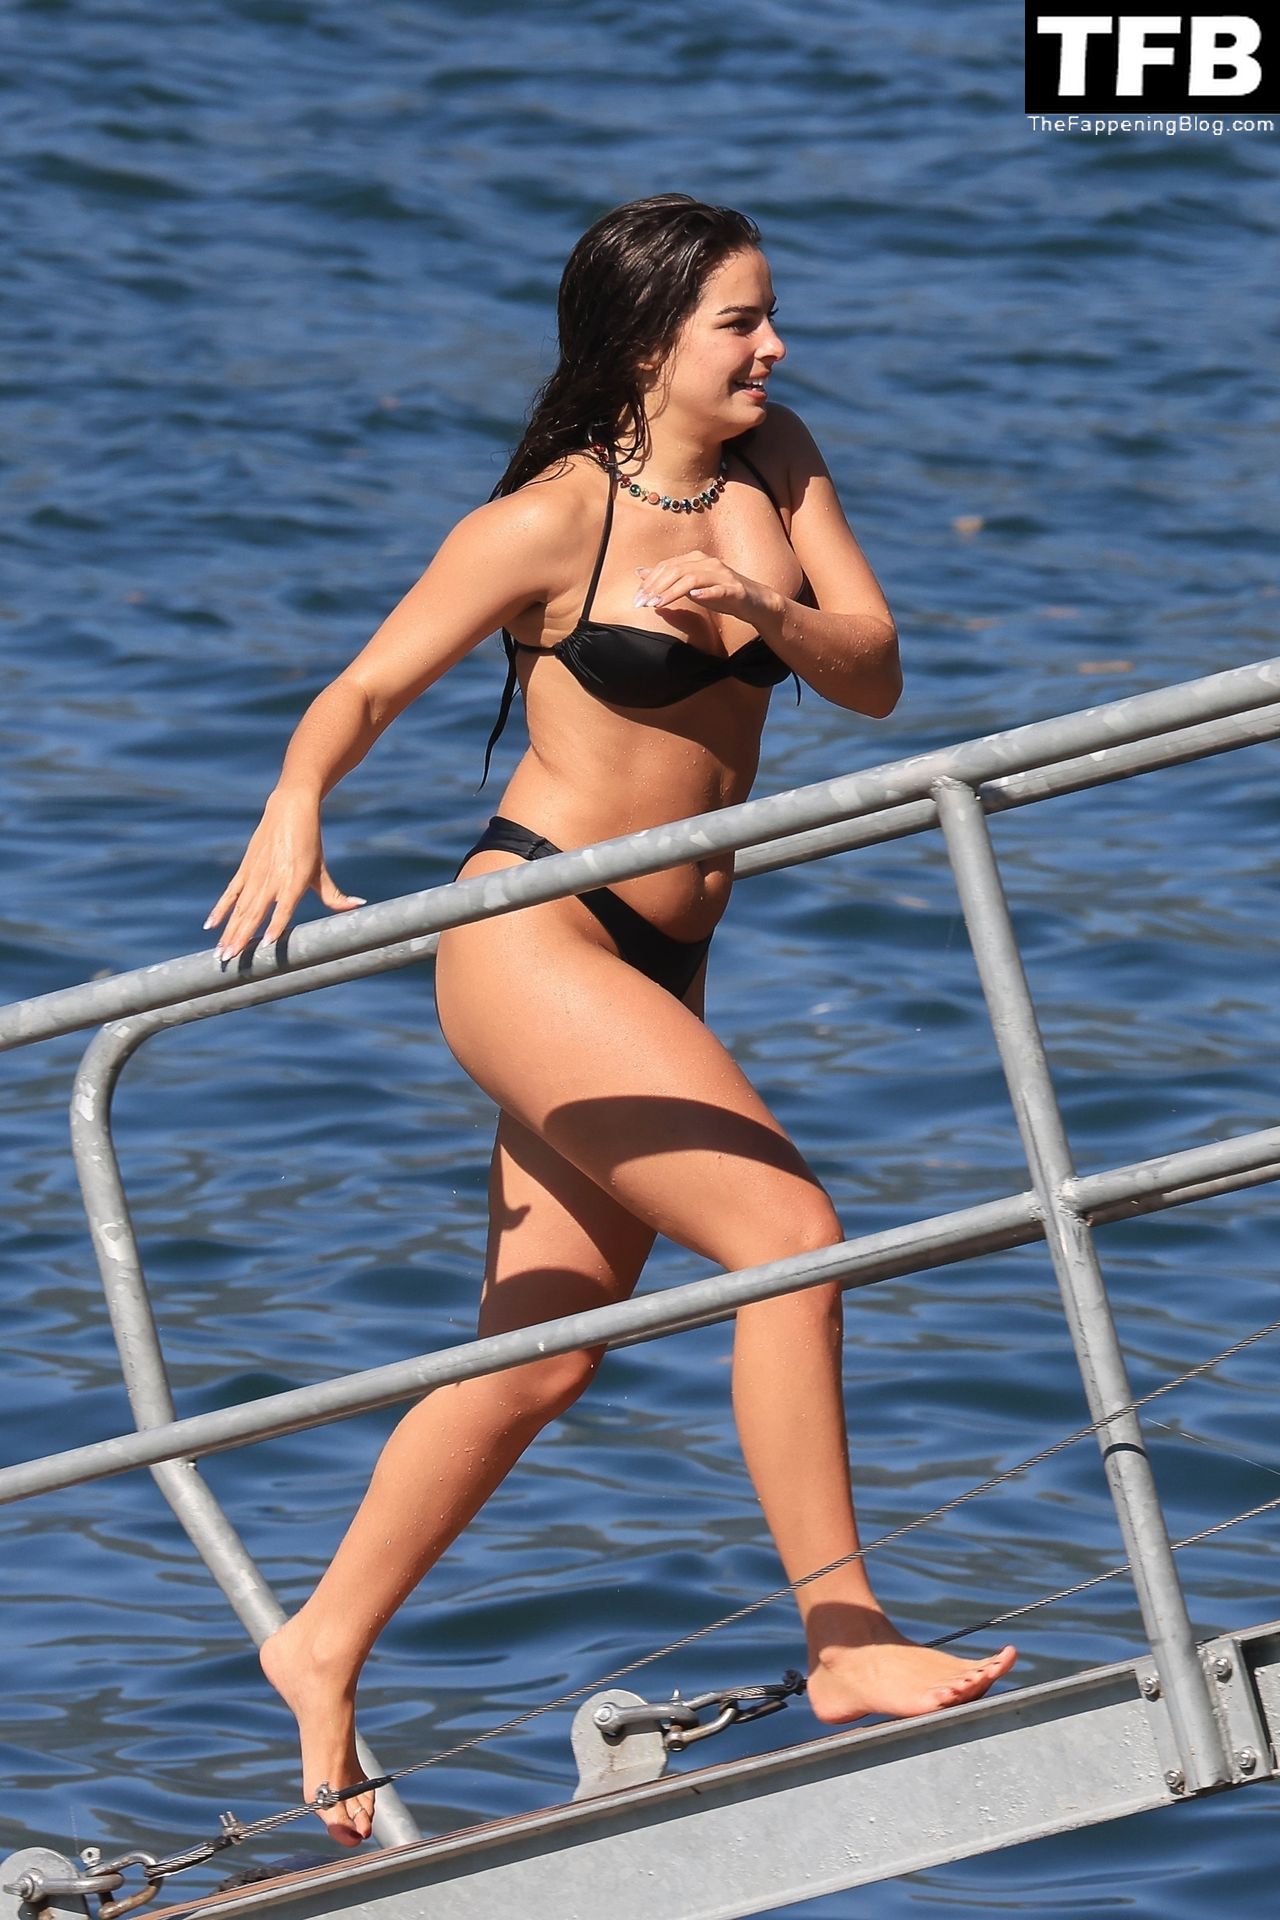 Addison Rae Sexy The Fappening Blog 46 - Addison Rae Displays Her Curves in a Black Bikini on Holiday with Omer Fedi on Lake Como (70 Photos)